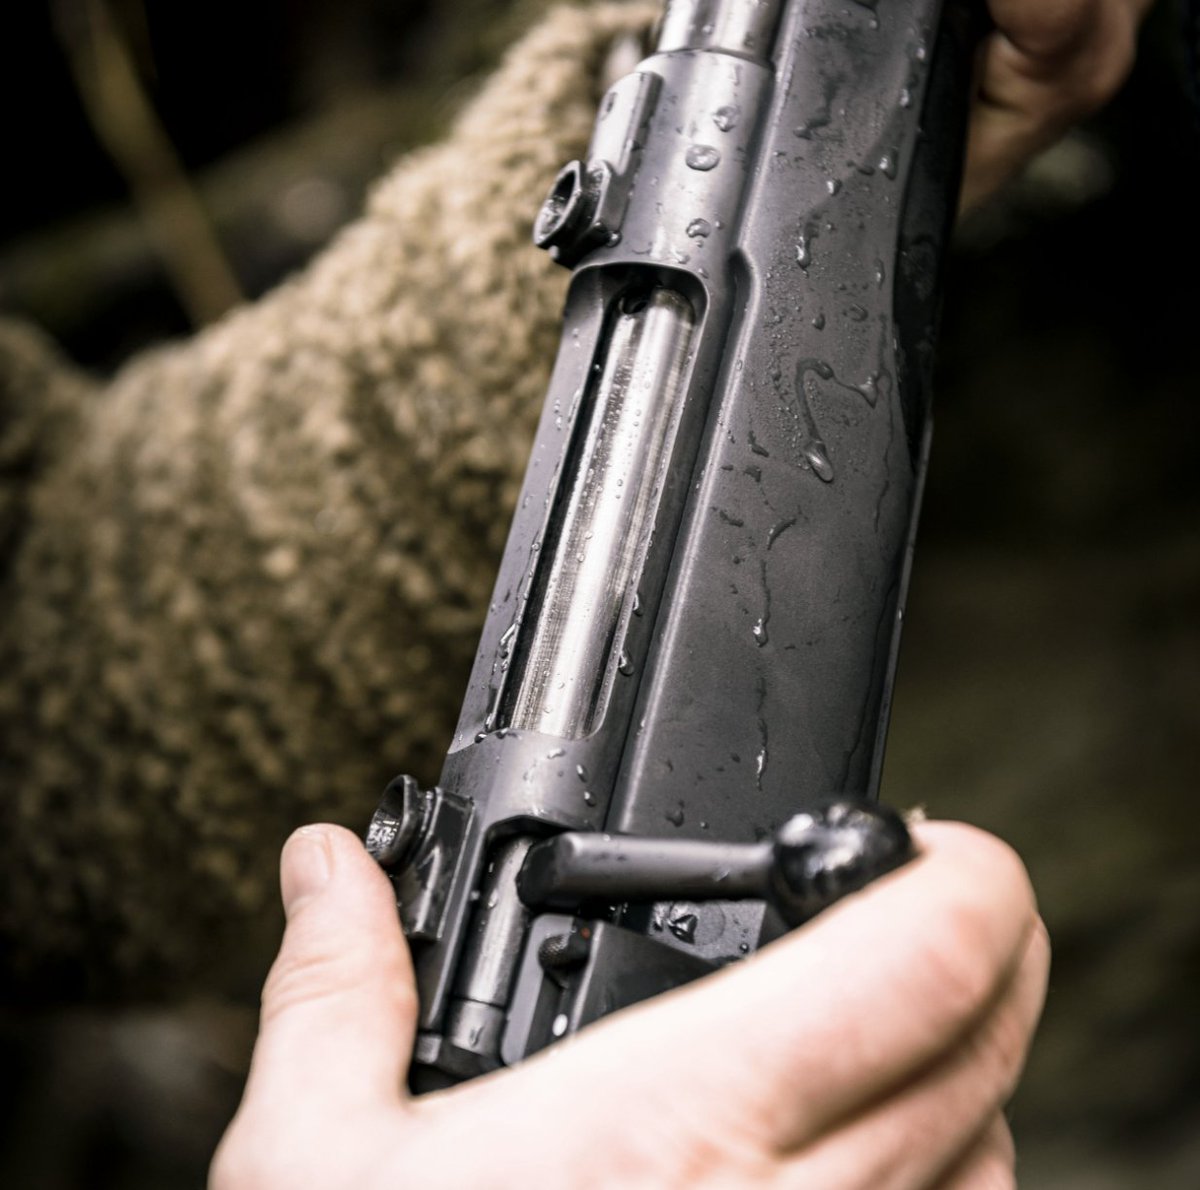 With over 10 Million rifles built, nothing means quality like MAUSER.

#mauserusa #mauserrifles #mauserm18 #mauser #huntingrifle #hunters #hunting